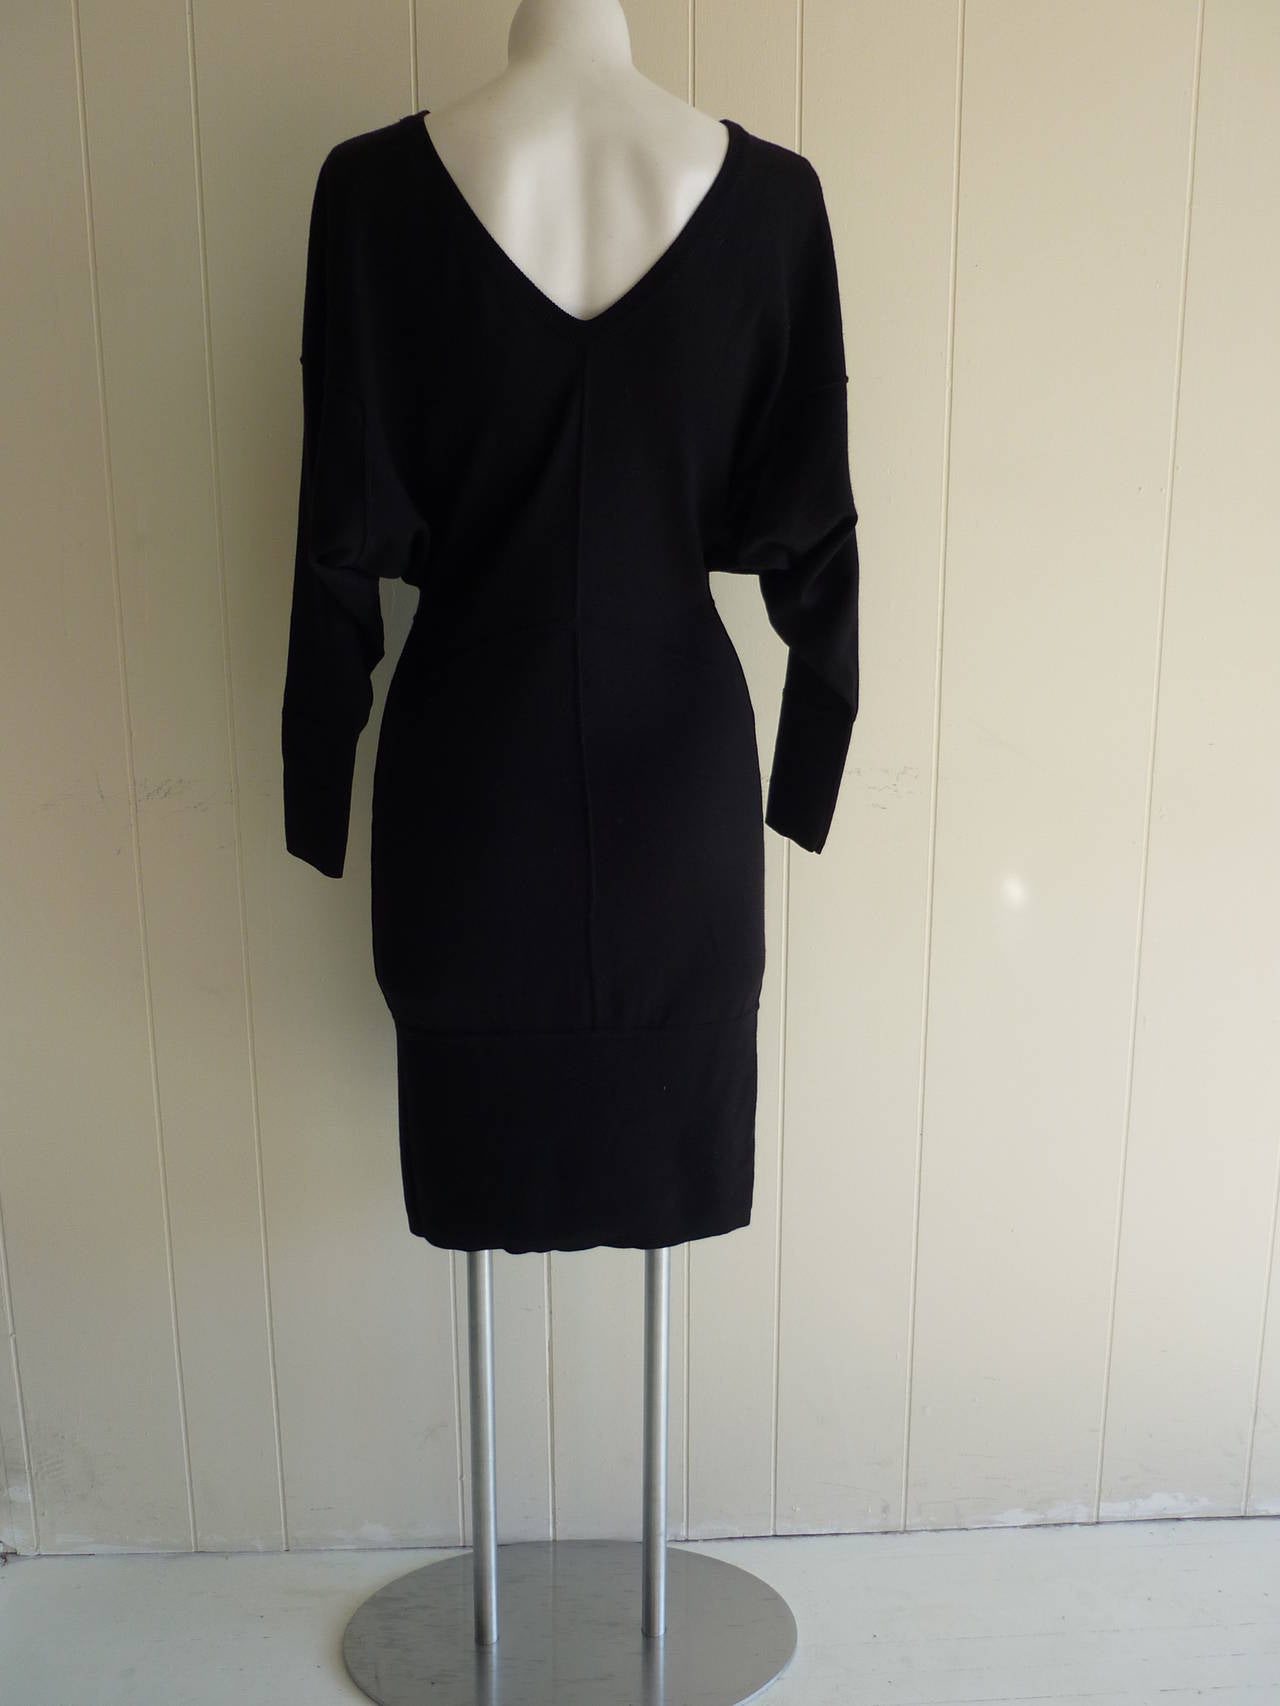 Women's 1980s Alaia Black Wool Dress with Butterfly Sleeves